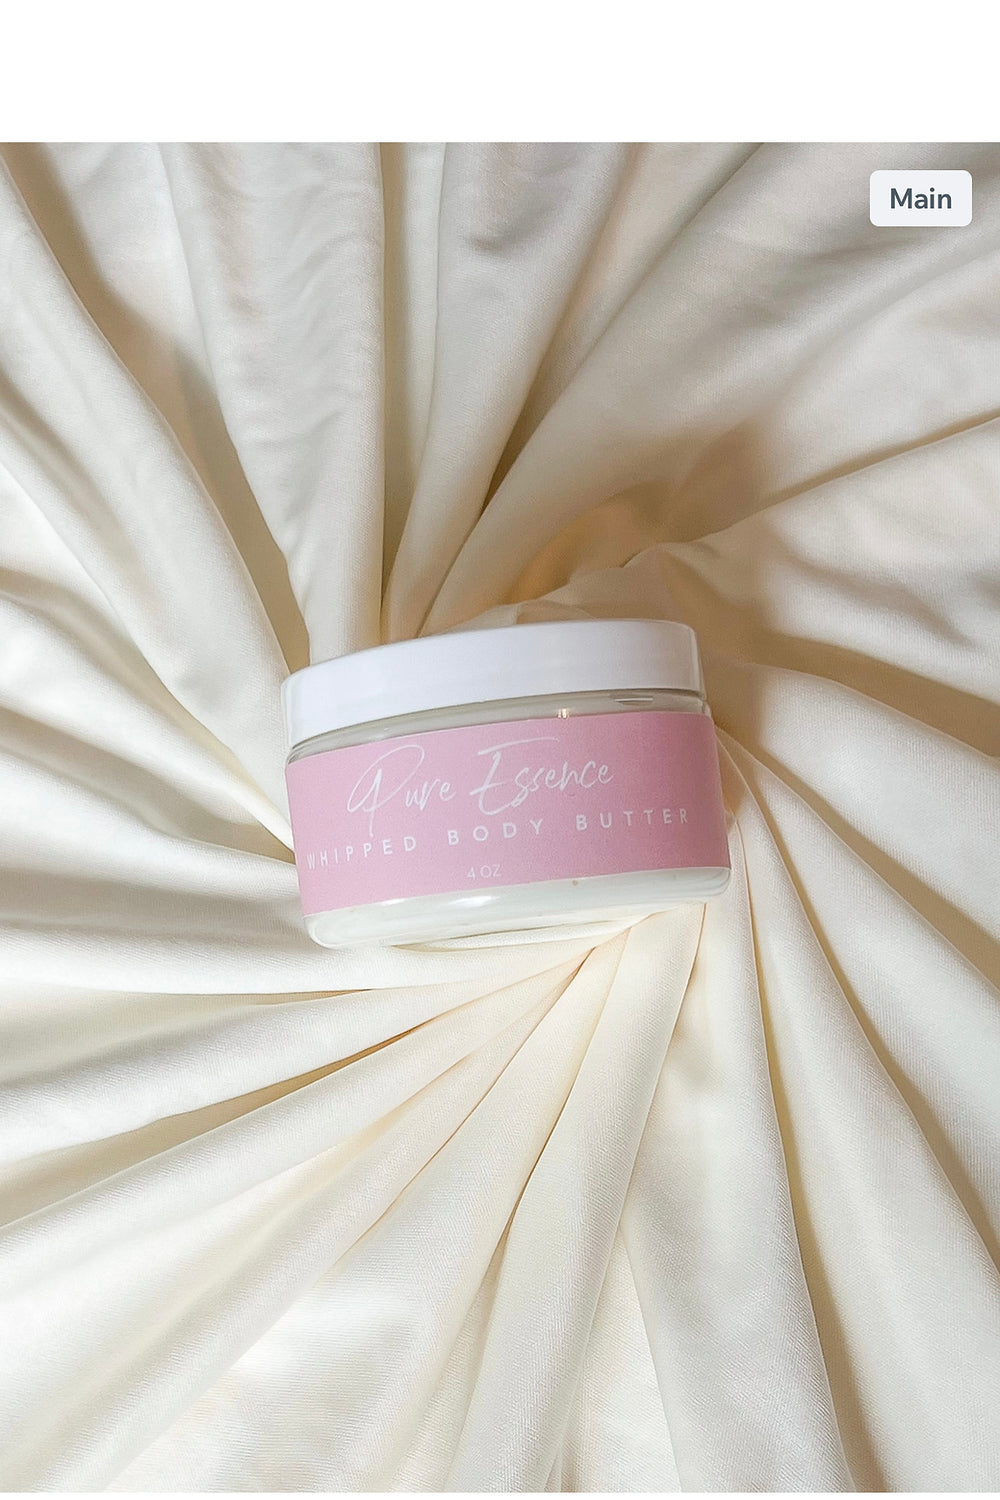 pure essence body butter